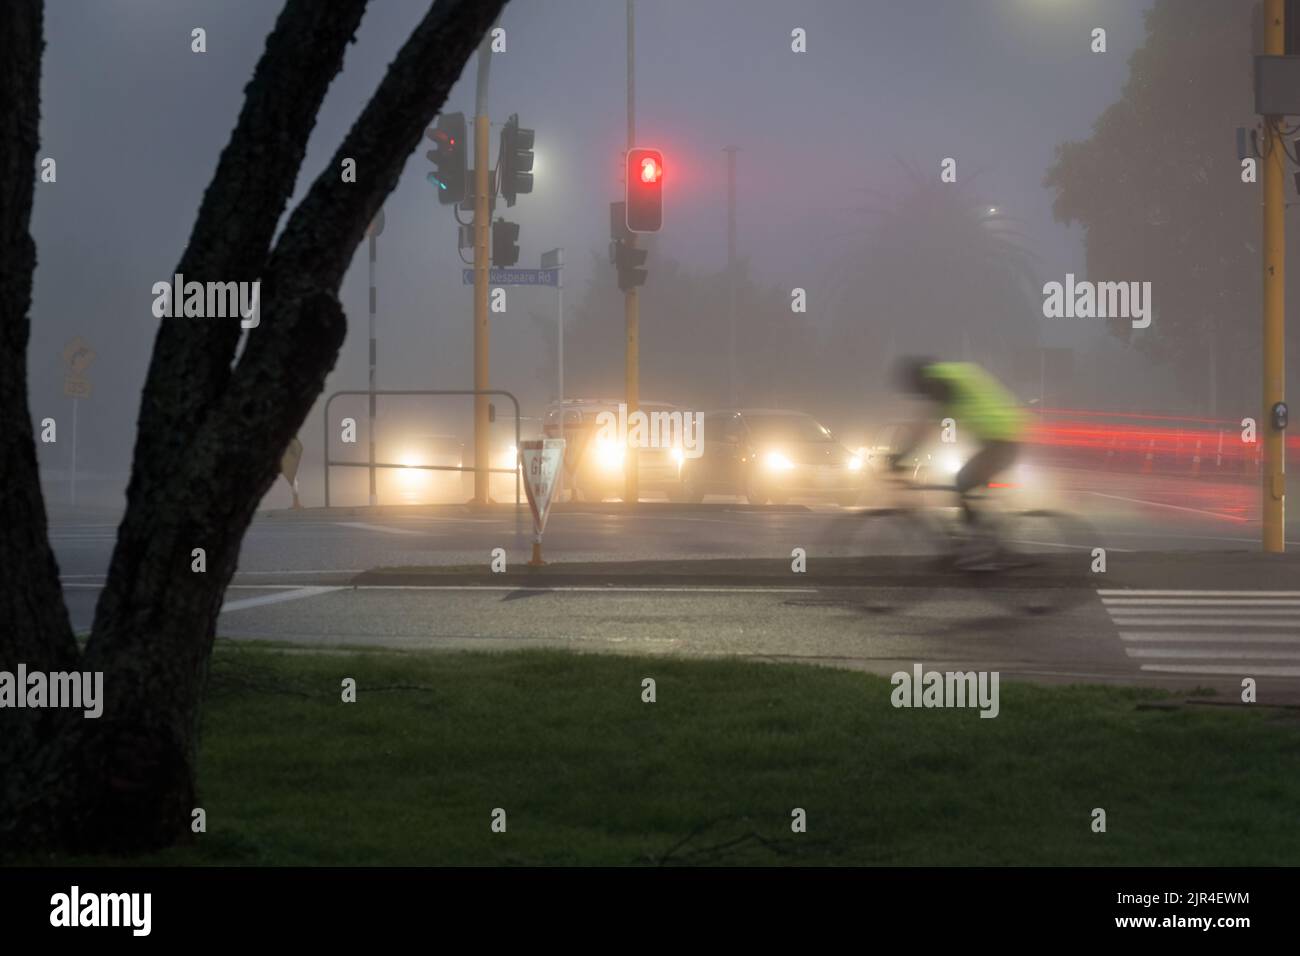 A cyclist riding in the morning fog. Cars stop at the traffic light. Motion blur image due to slow shutter speed. Stock Photo